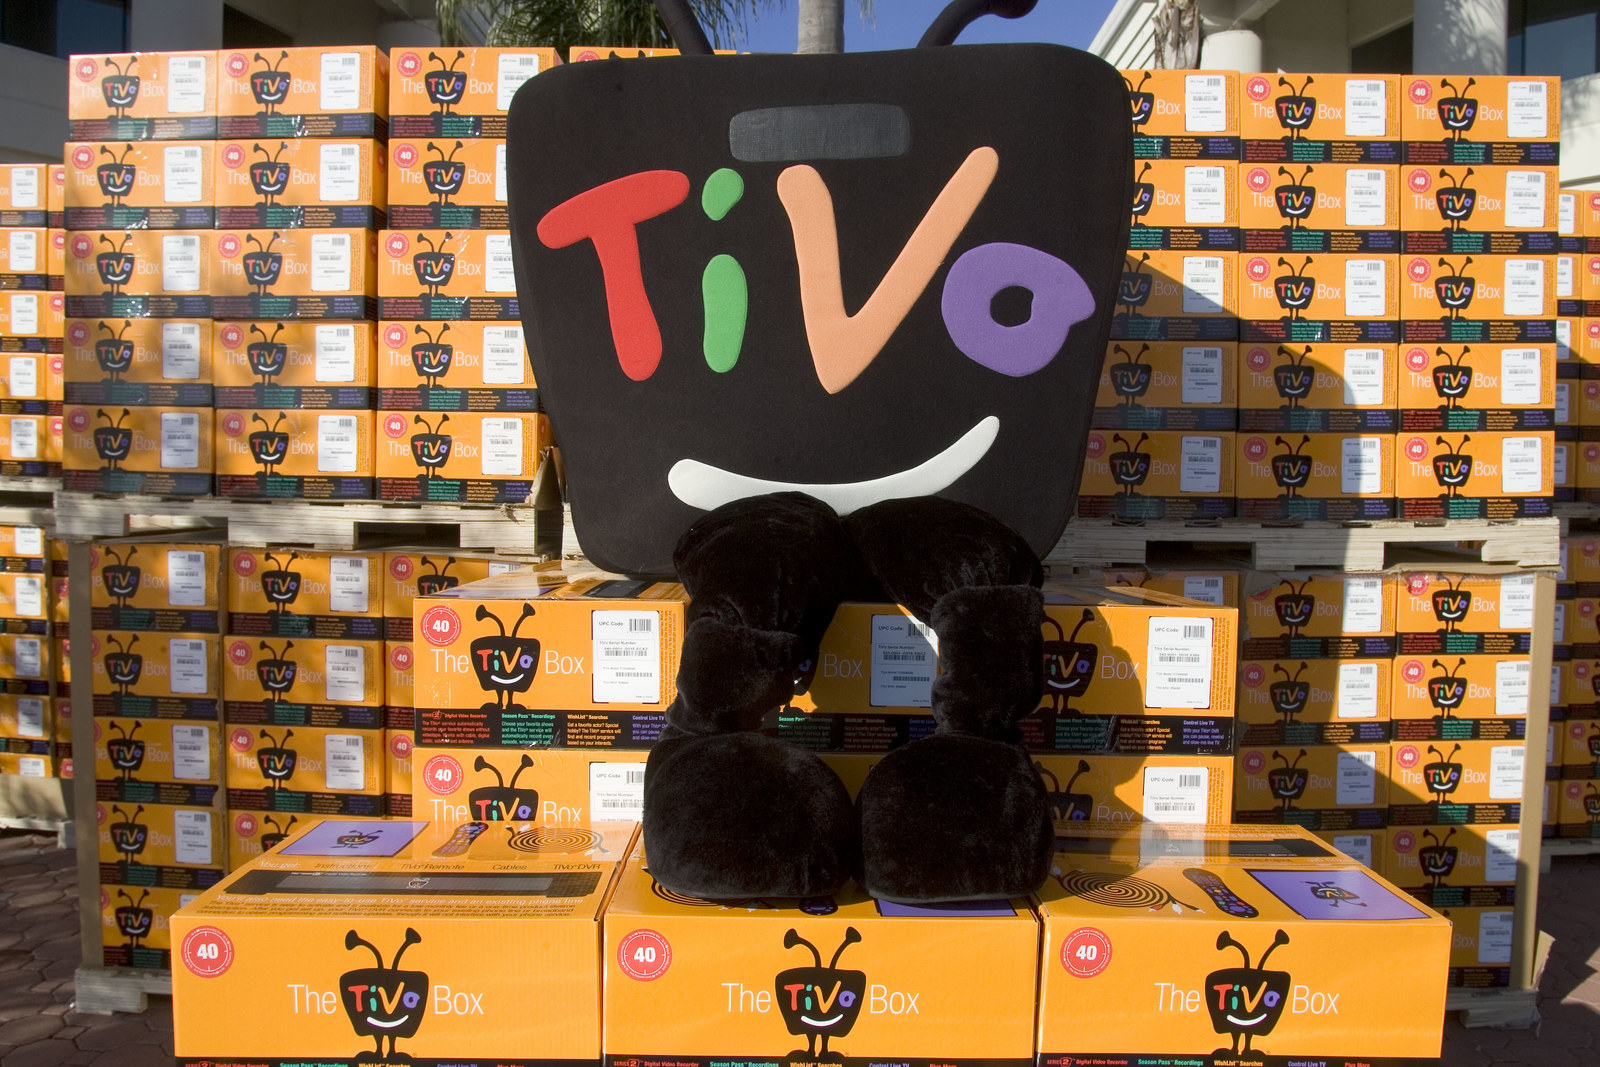 The TiVo mascot sitting on a bunch of orange boxes.  